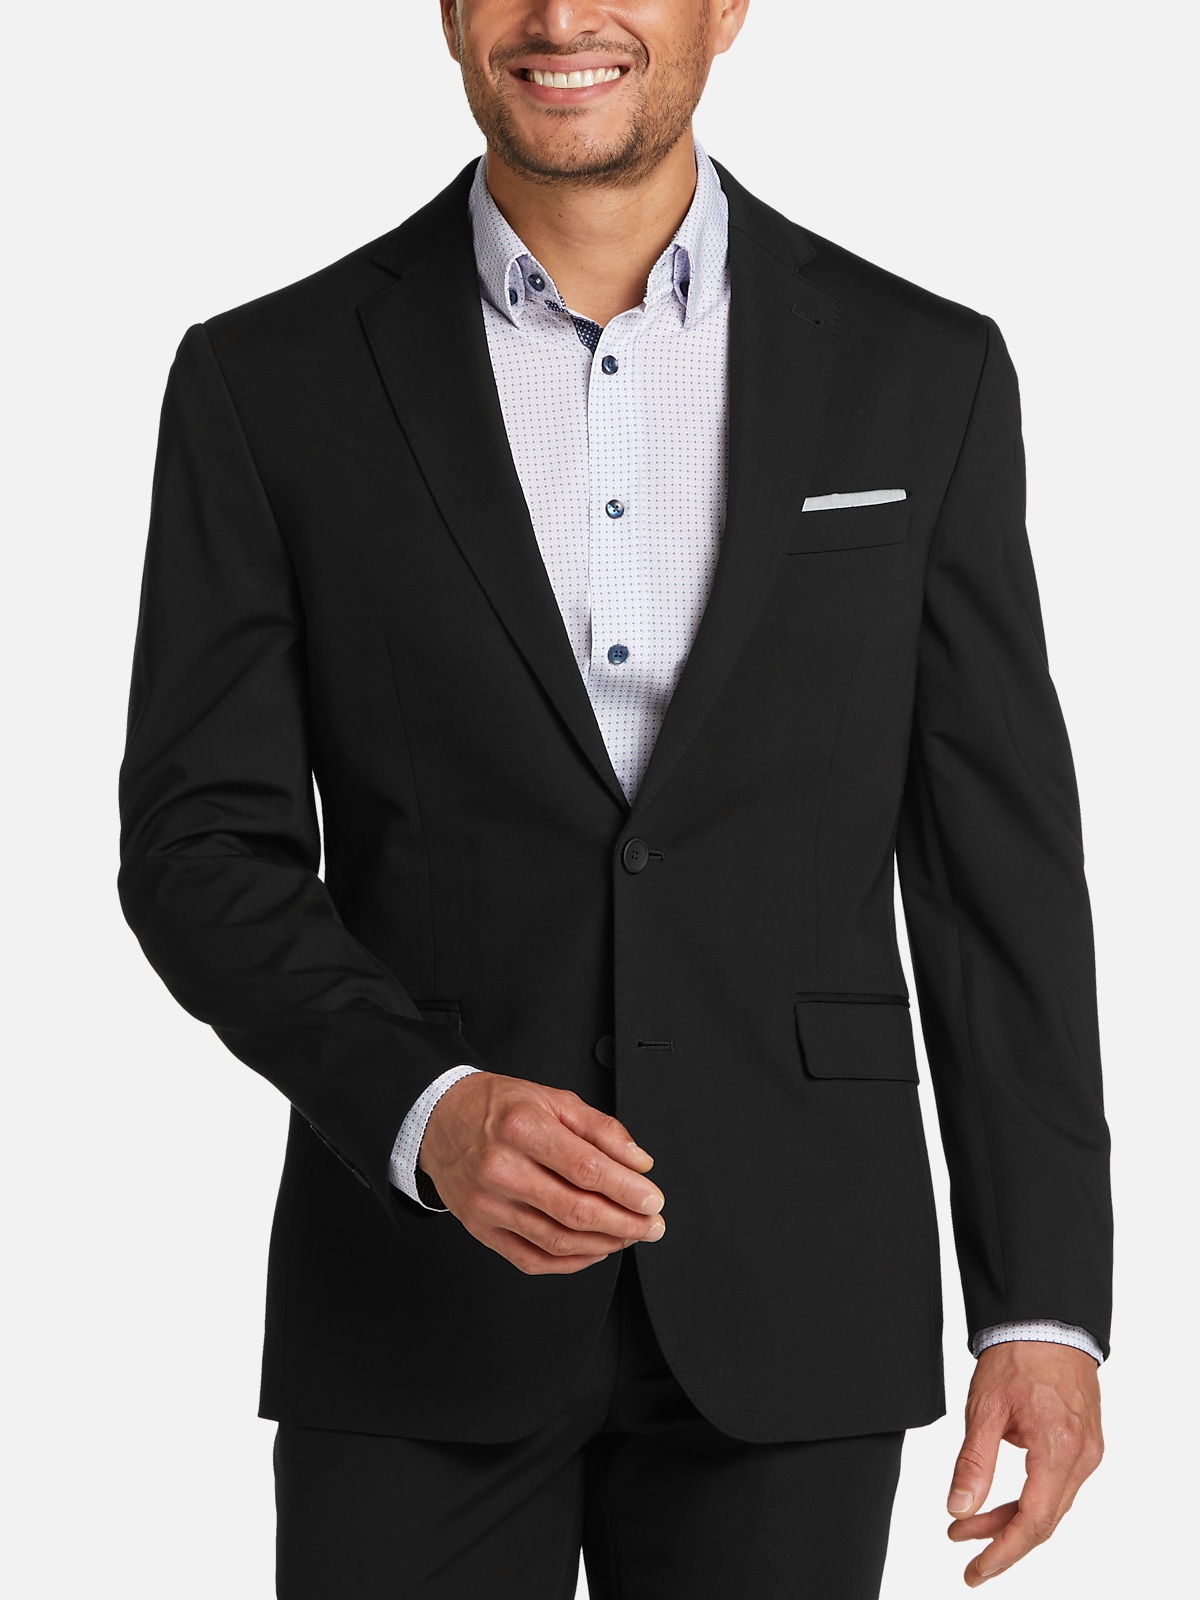 Awearness Kenneth Cole Knit Slim Fit Suit Separates Jacket | All Sale ...